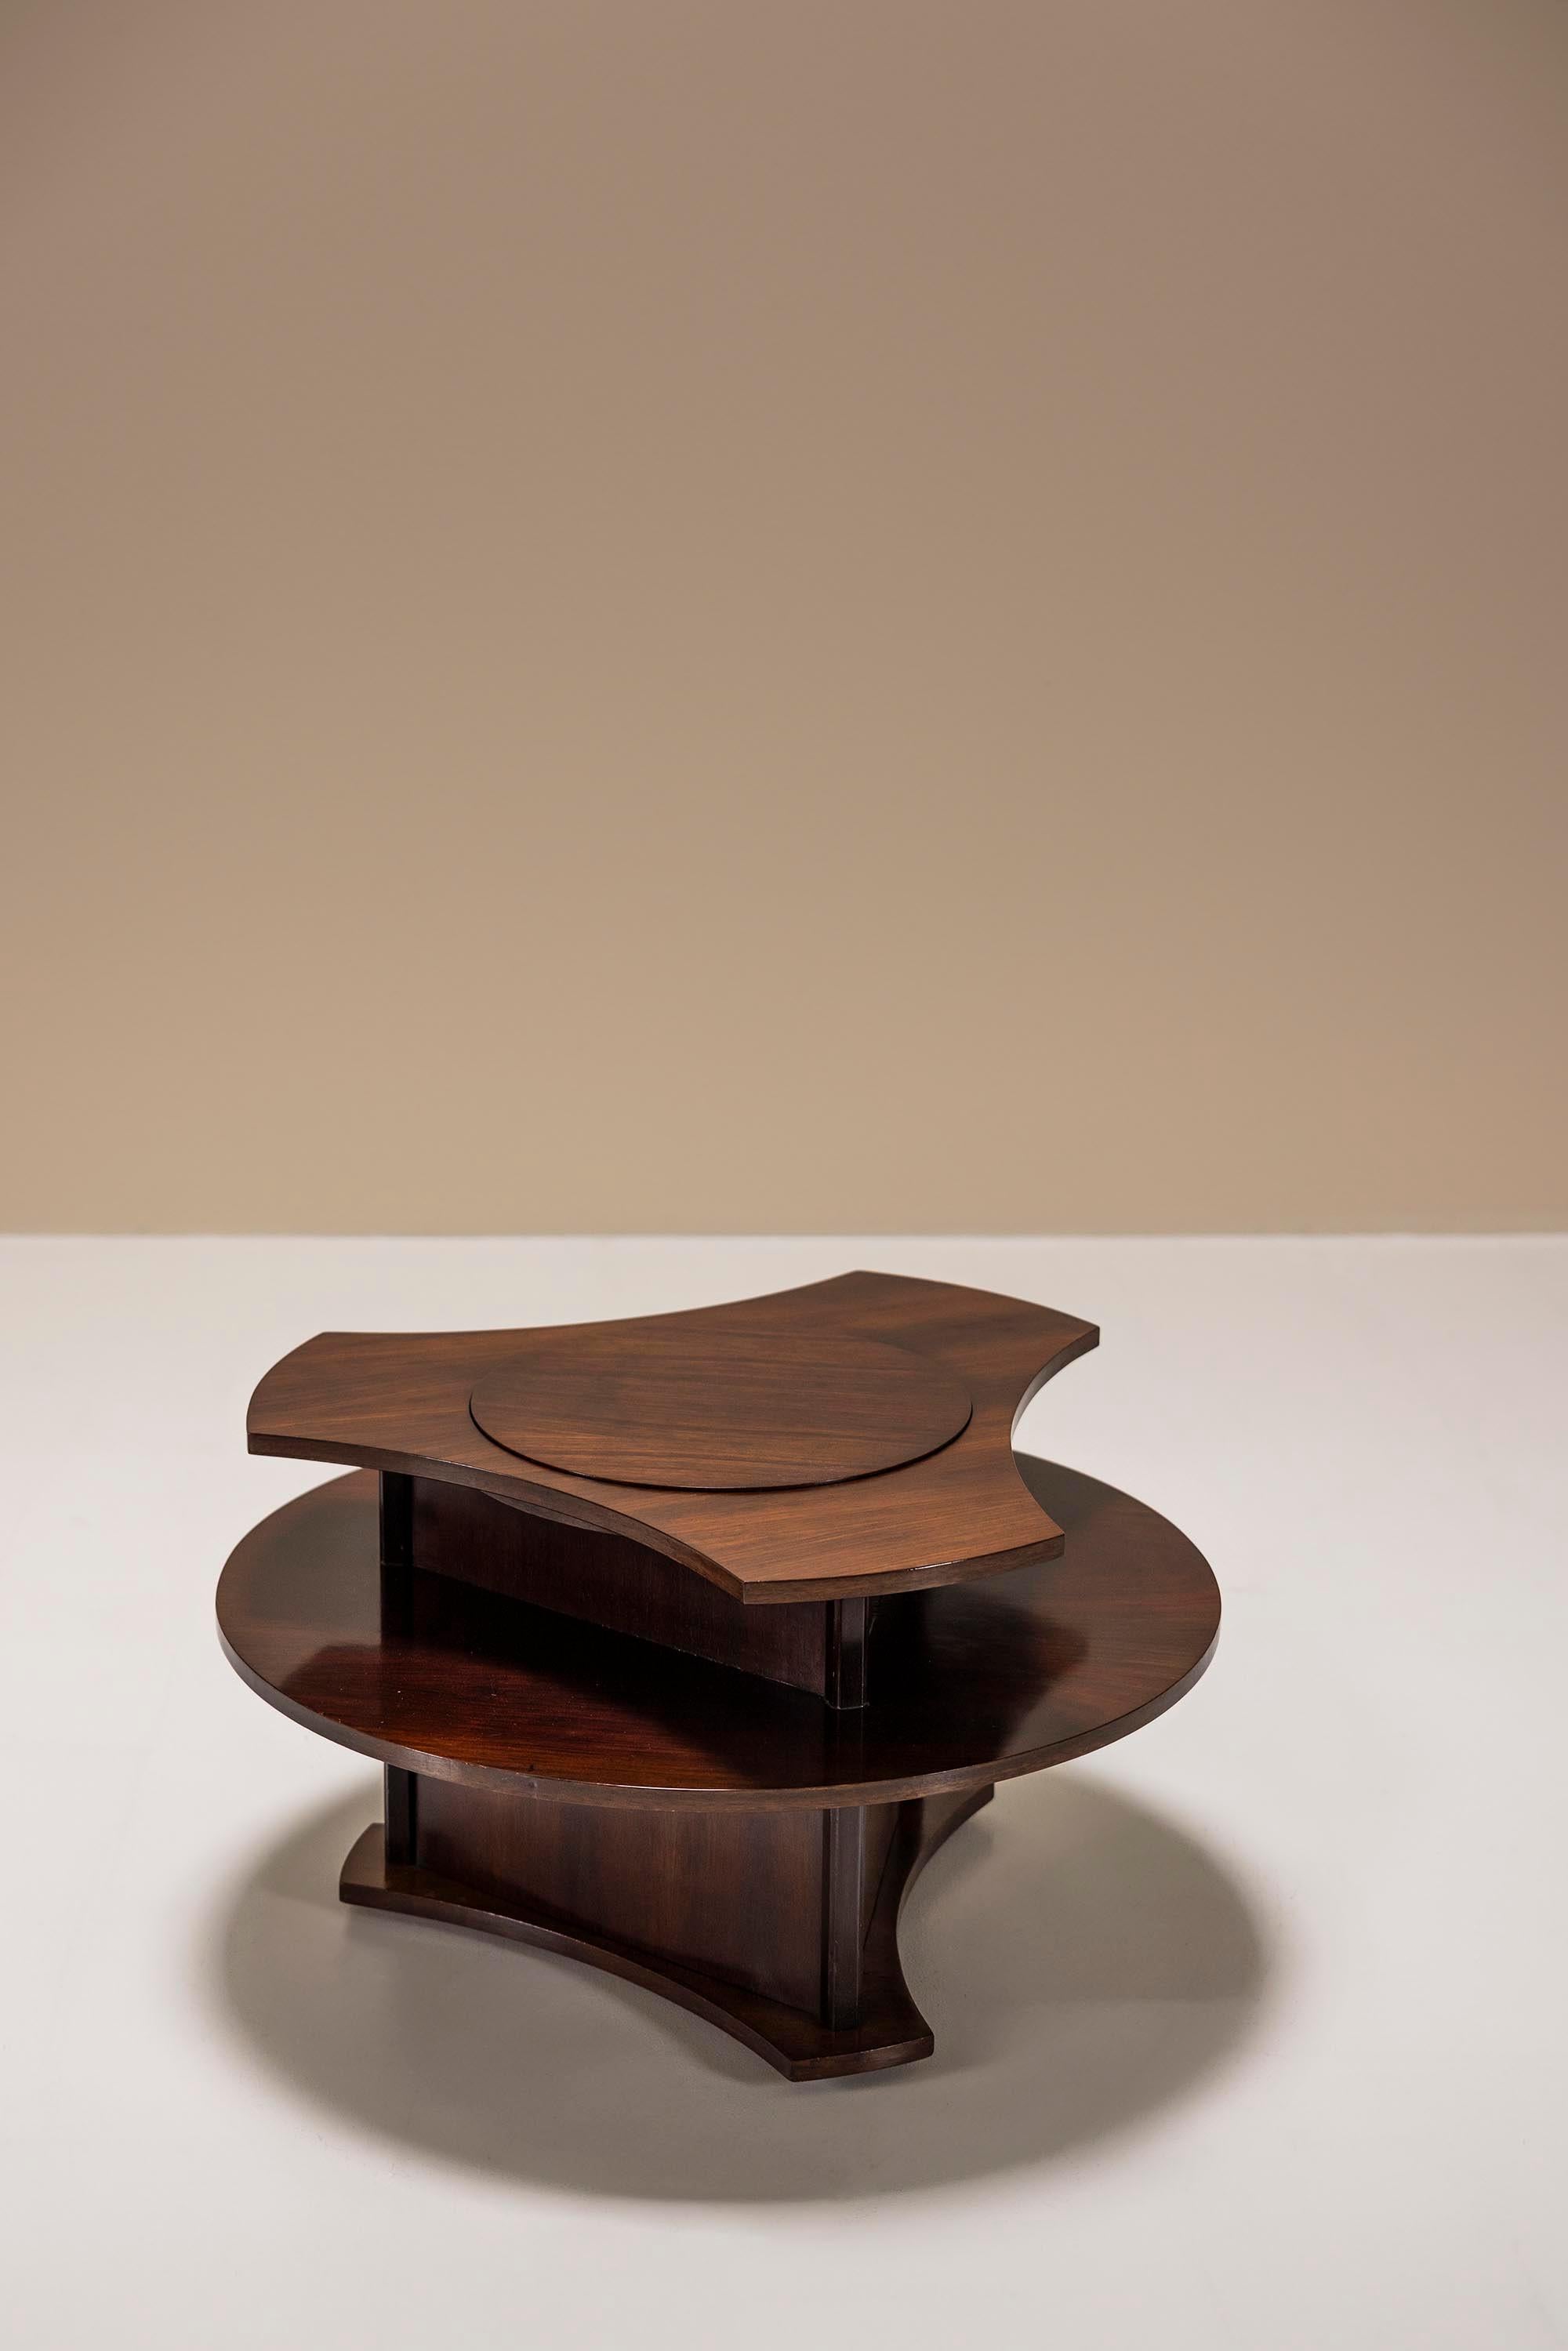 Mid-20th Century Dry Bar- or Coffee Table in Mahogany Veneer by Gervasoni, Italy 1960s For Sale